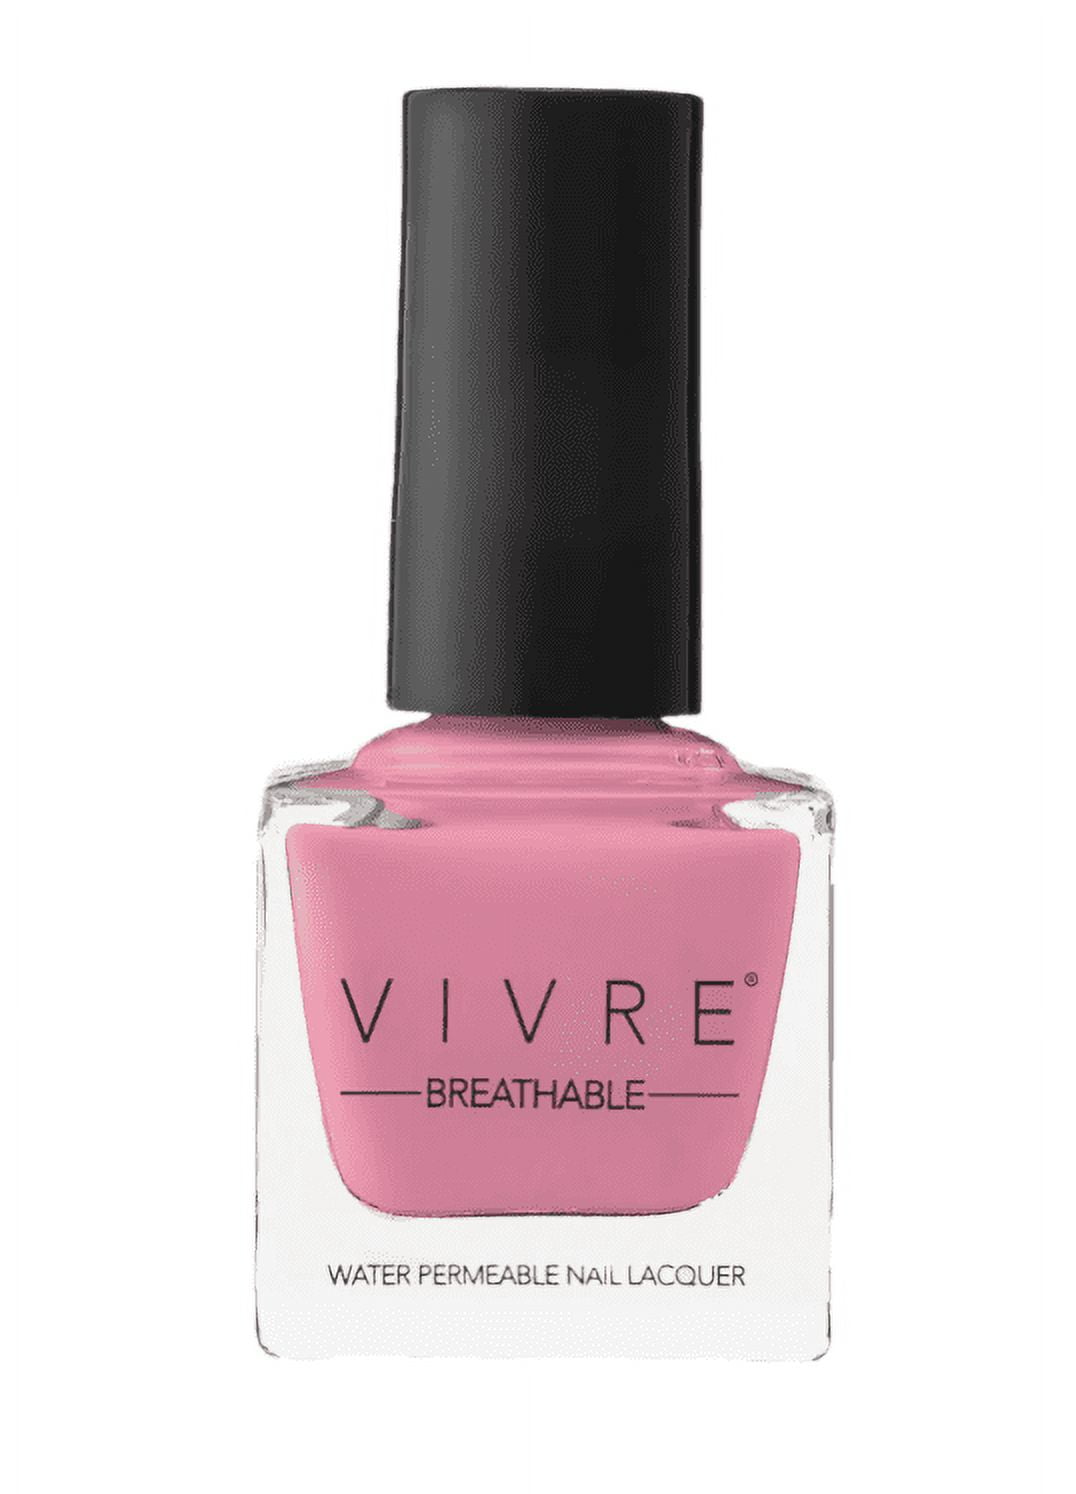 VIVRE Certified Breathable Water Oxygen Permeable Vegan toxic free Halal Nail Polish What s the Mauve af27efd2 0e97 4797 a9b4 97bcaef934a1.cb7520baaa701afd0db2538a622e5ded